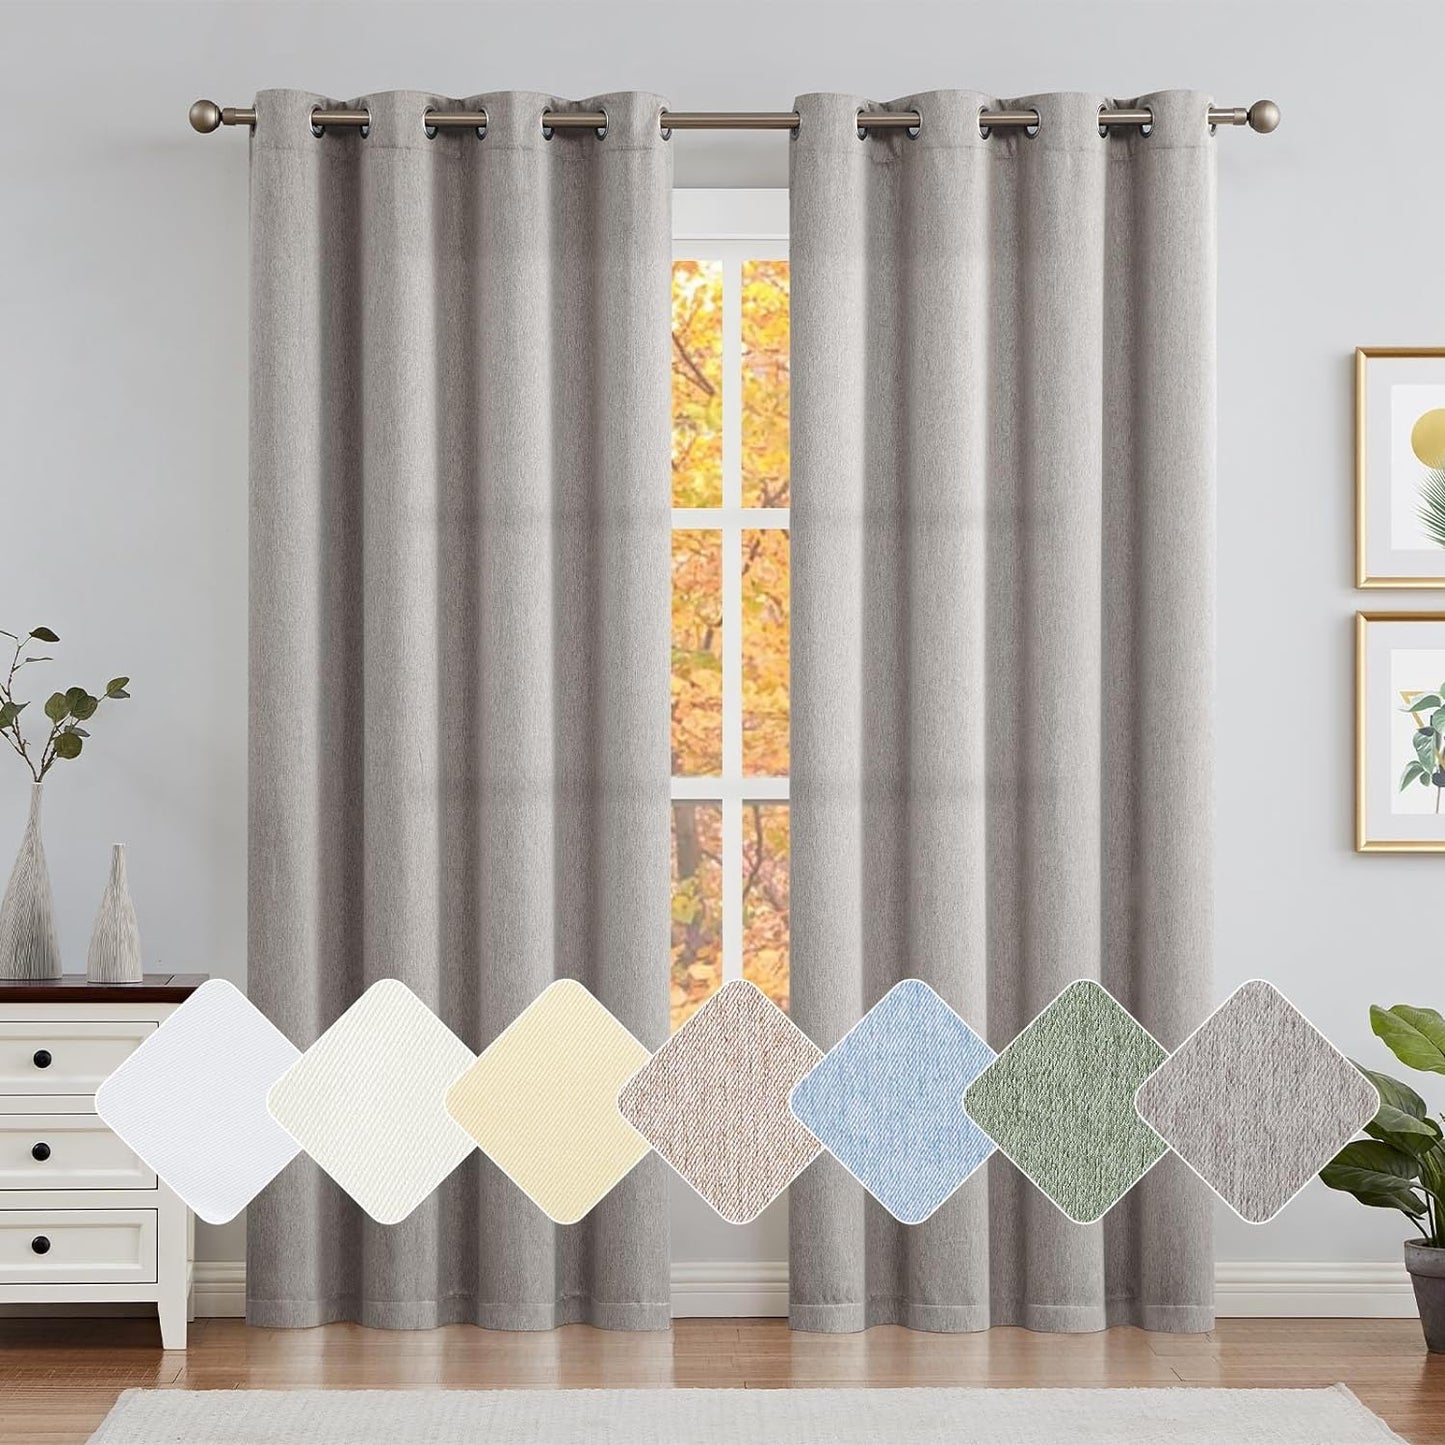 Jinchan Curtains for Bedroom Living Room 84 Inch Long Room Darkening Farmhouse Country Window Curtains Heathered Denim Blue Curtains Grommet Curtains Drapes 2 Panels  CKNY HOME FASHION *Grey 50"W X 84"L 